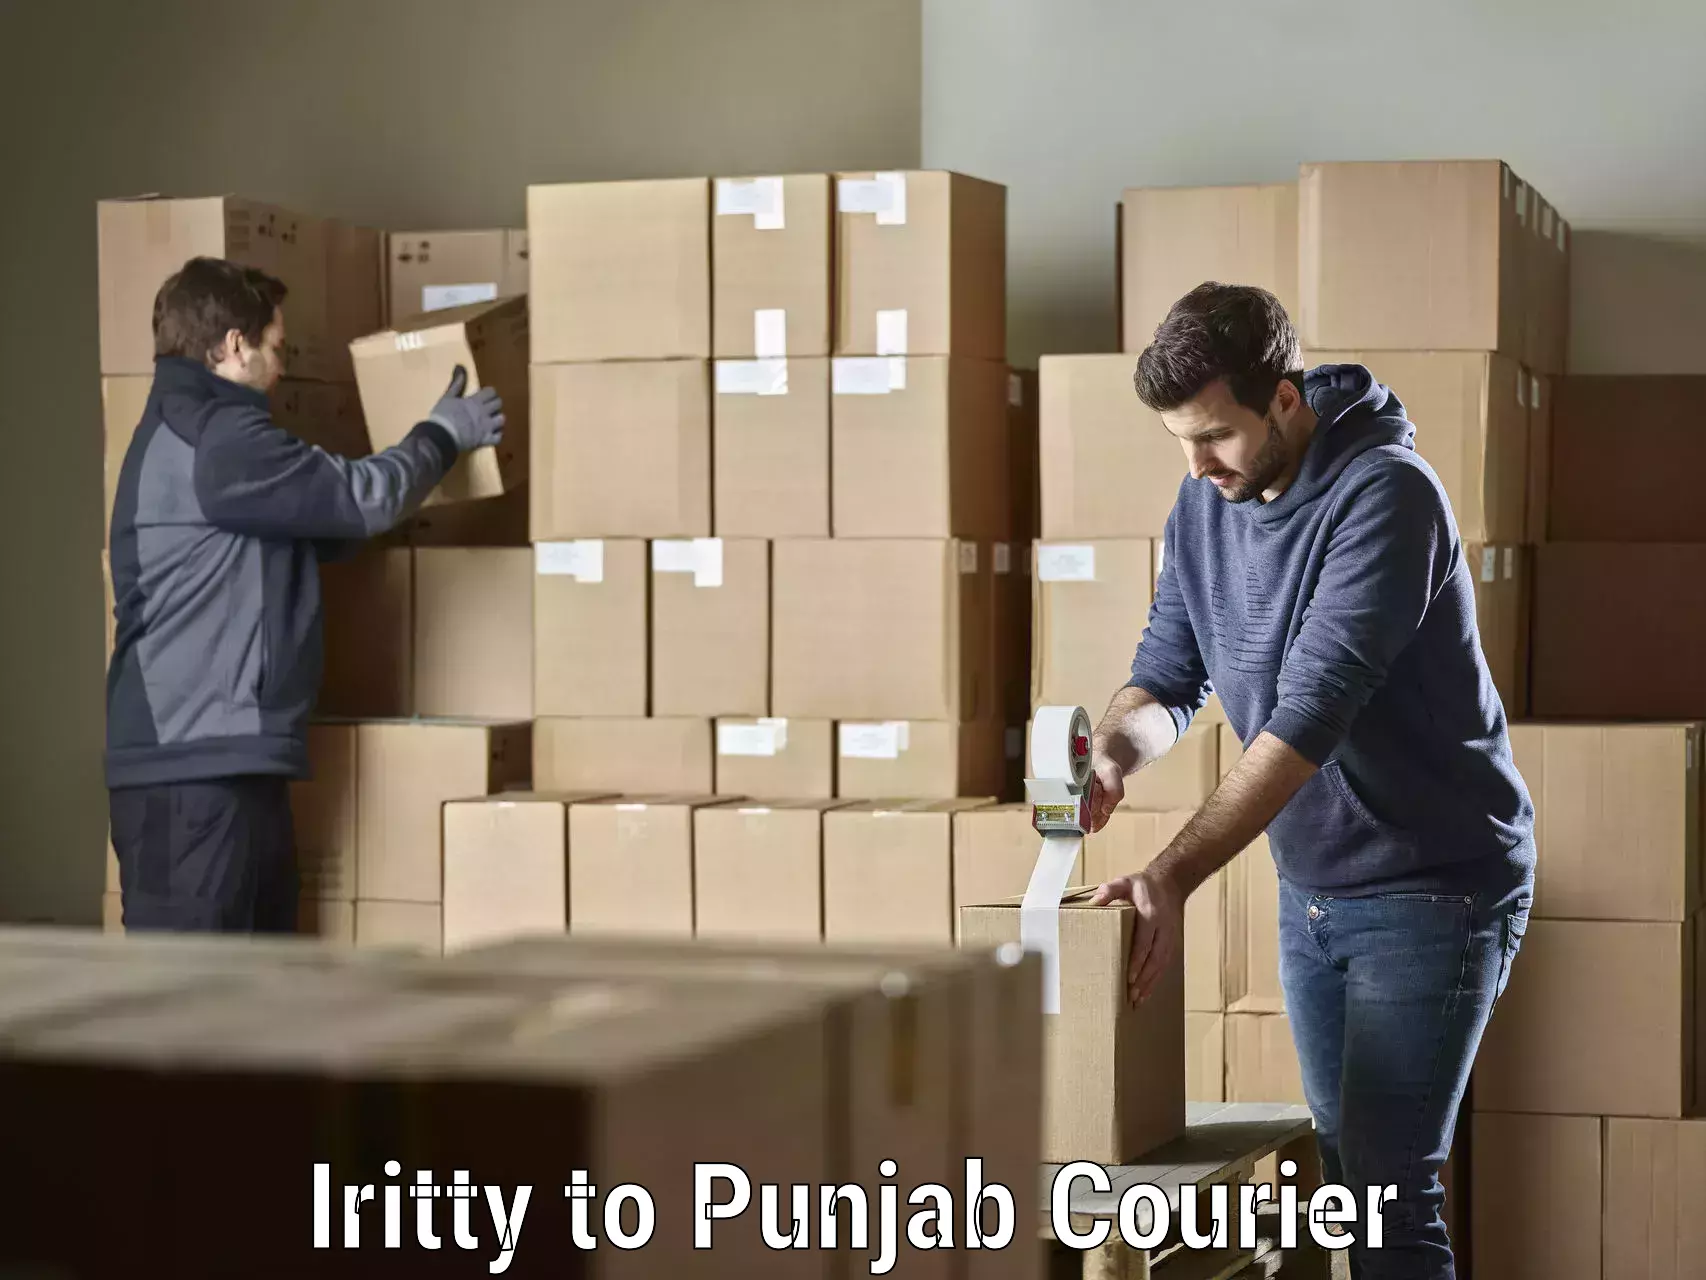 24/7 courier service Iritty to Punjab